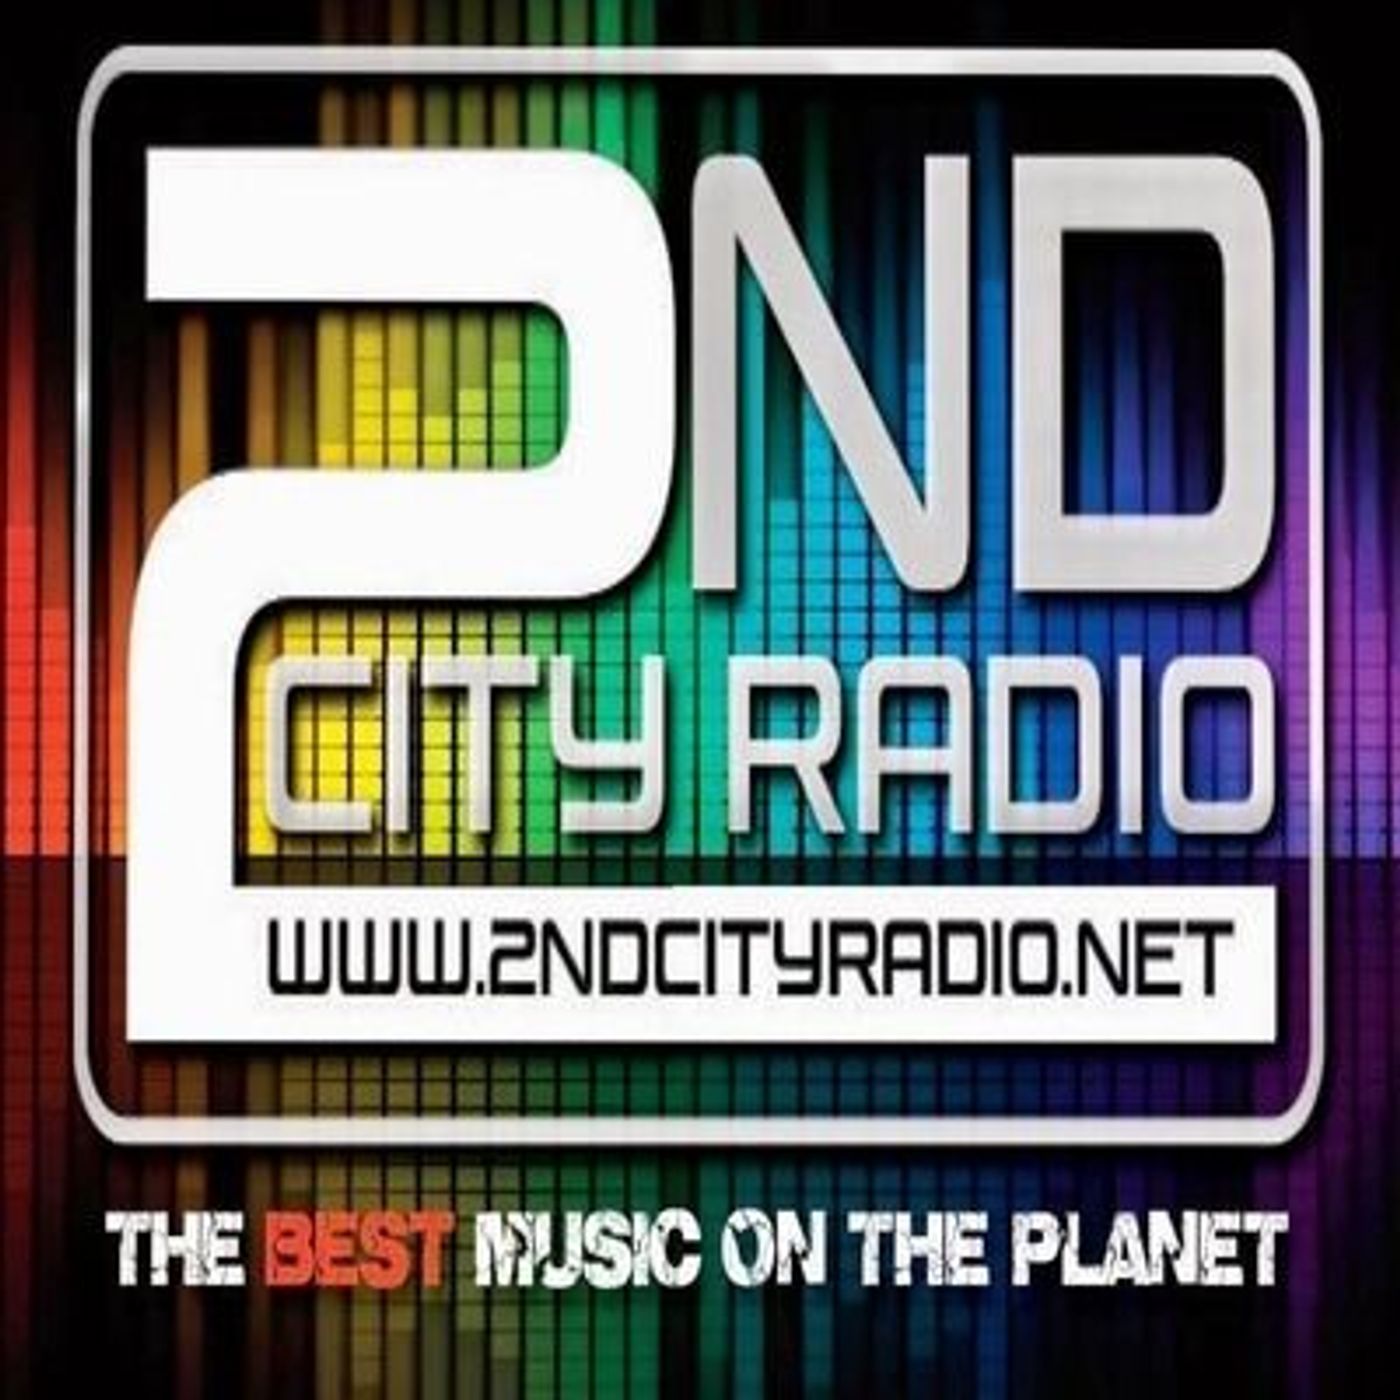 Monday the 23rd of May 2022 on 2ndcity Radio with Classic Chat